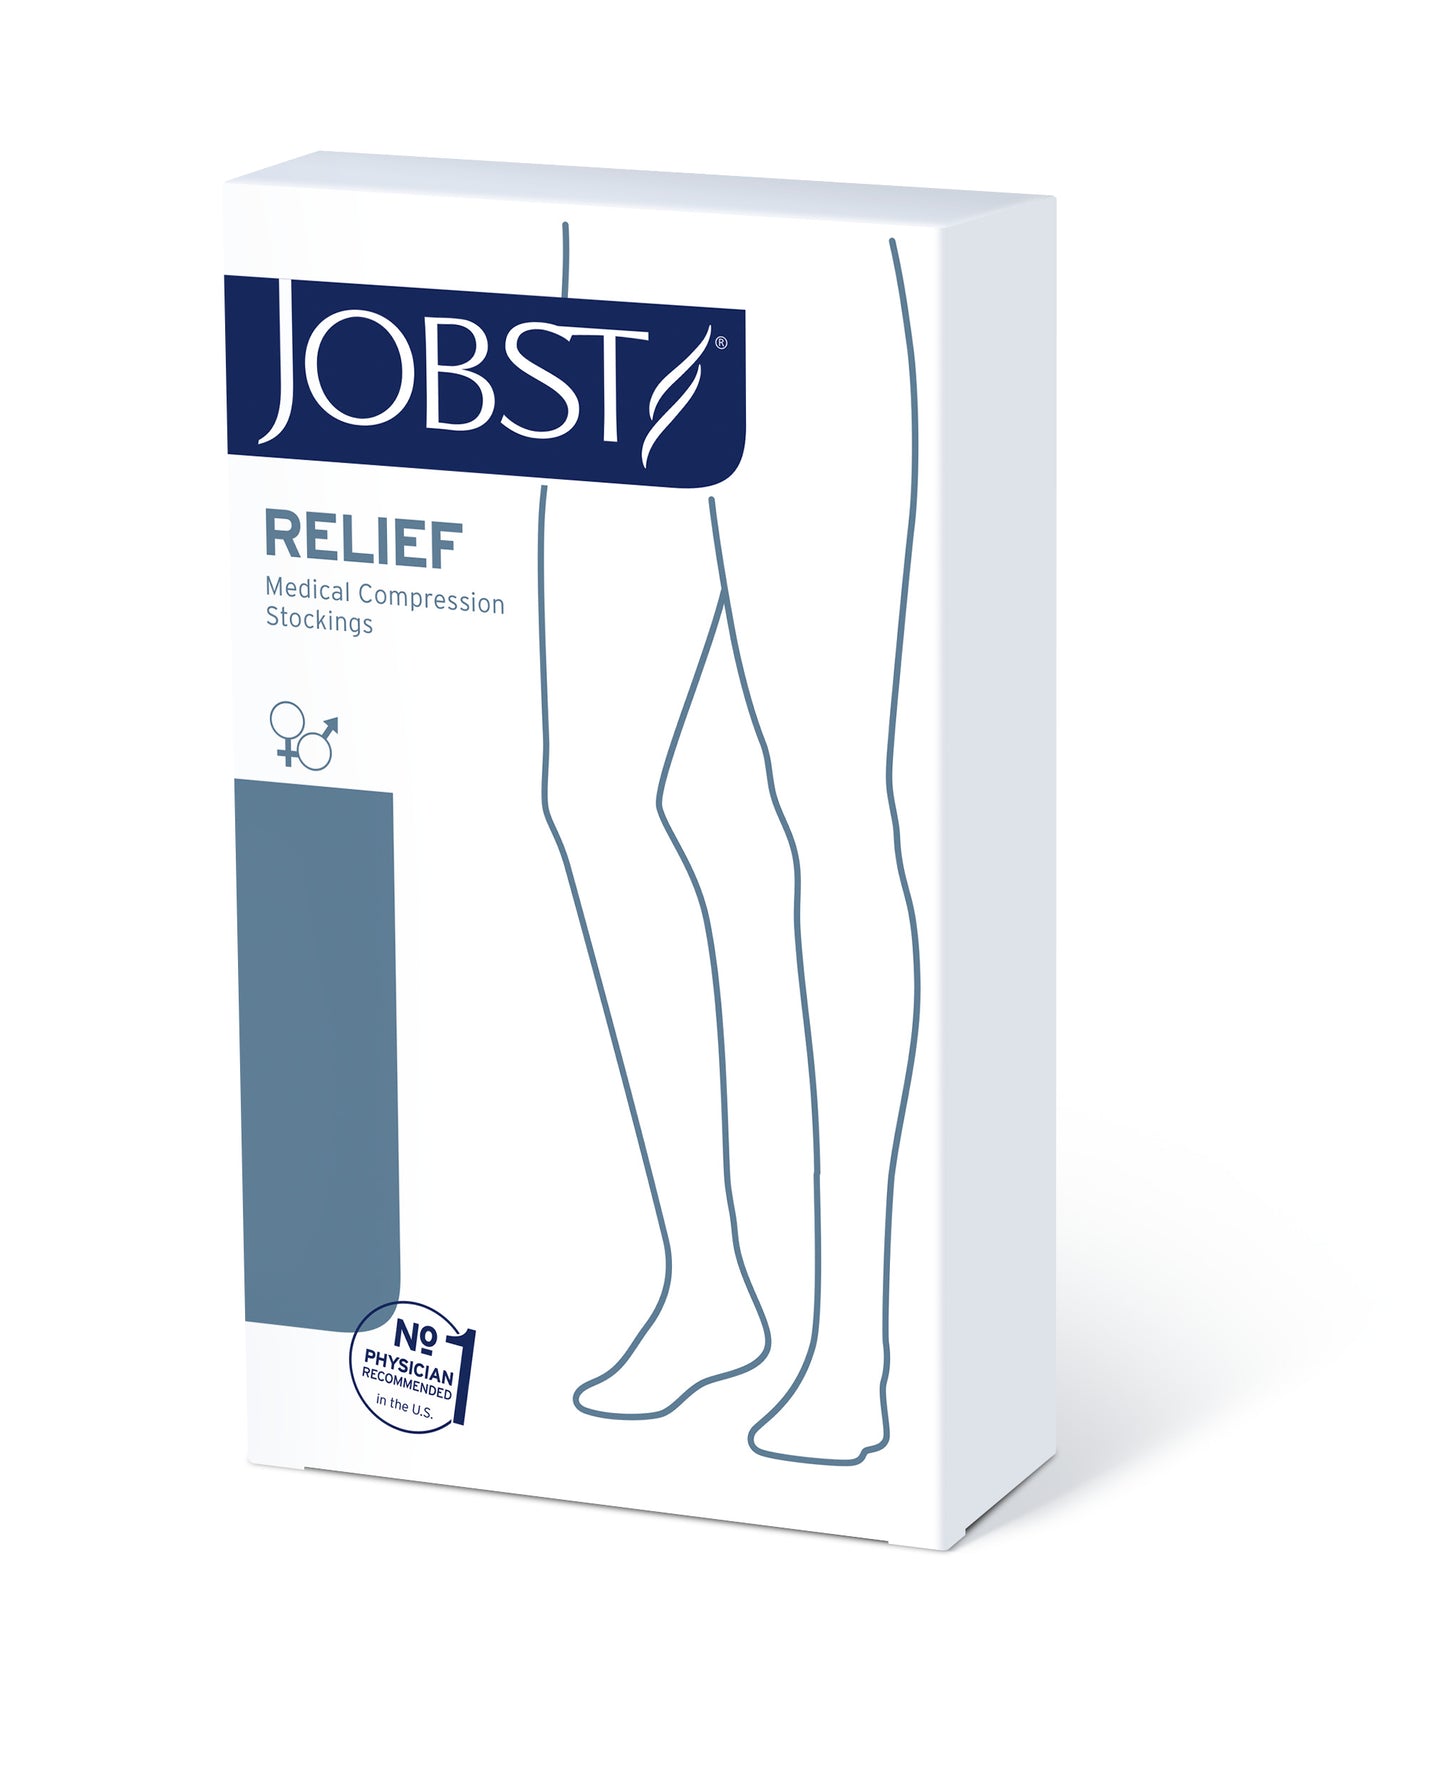 JOBST Relief Compression Stockings 15-20 mmHg Waist High Closed Toe